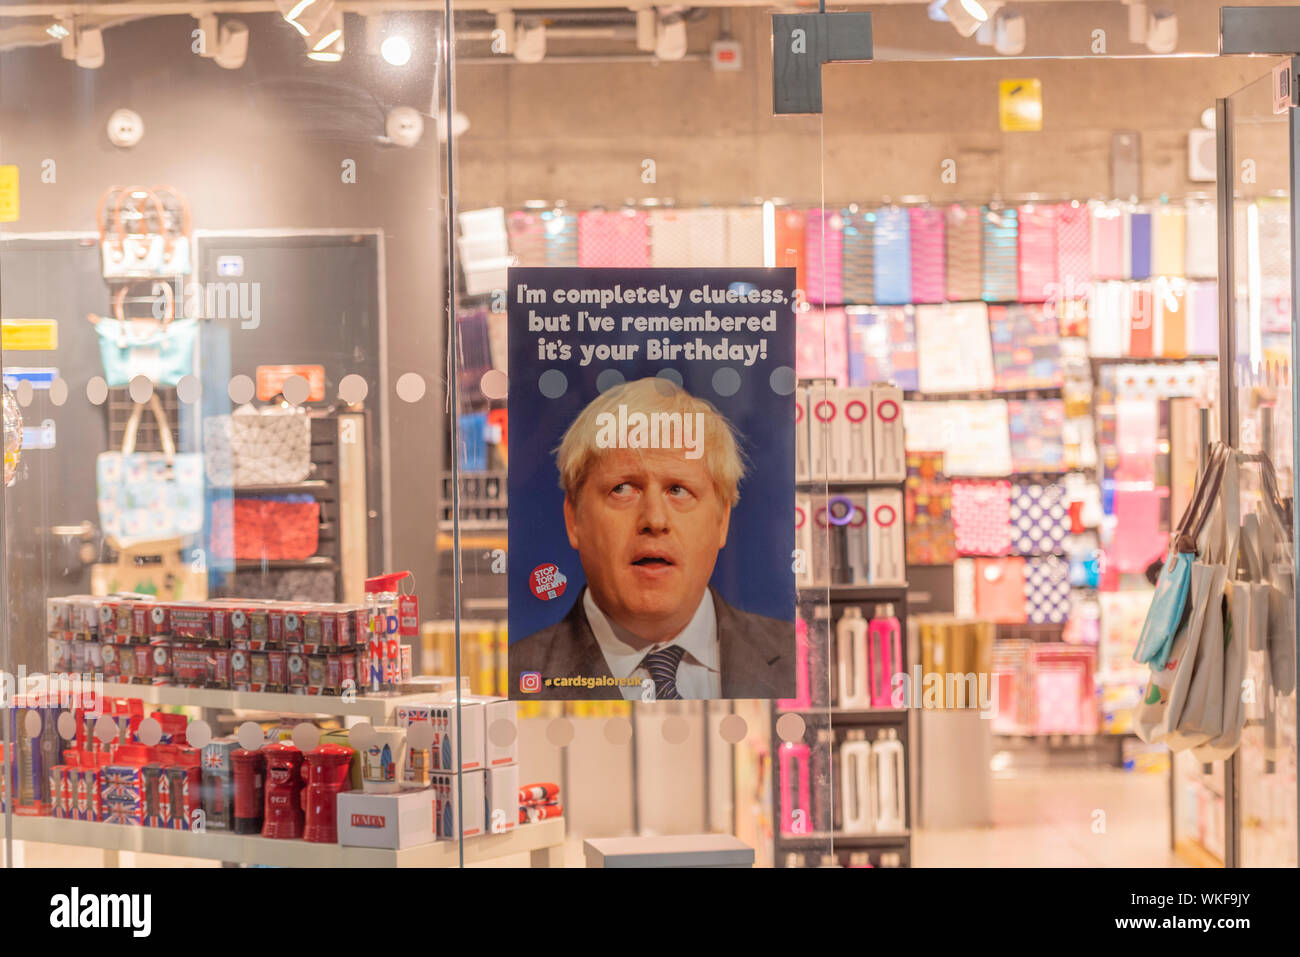 Image of Prime Minister Boris Johnson used as an advertisement for greetings card shop. I'm completely clueless but I've remembered your birthday Stock Photo